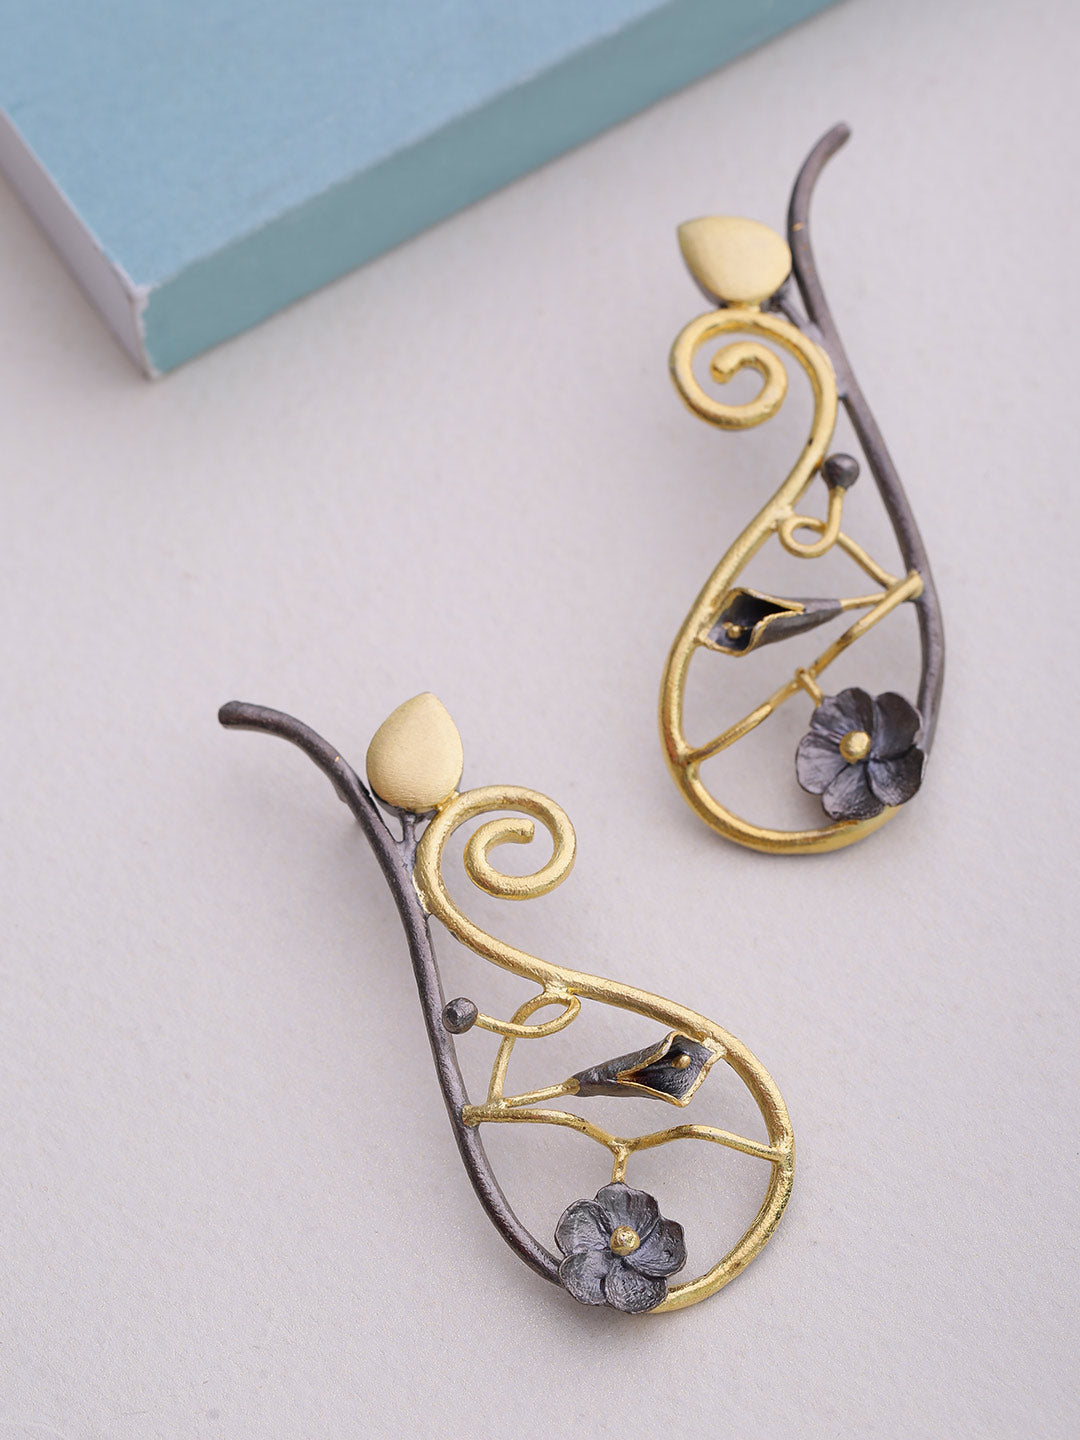 Dual-Toned Beautiful Design Floral Handcrafted Drop Earrings